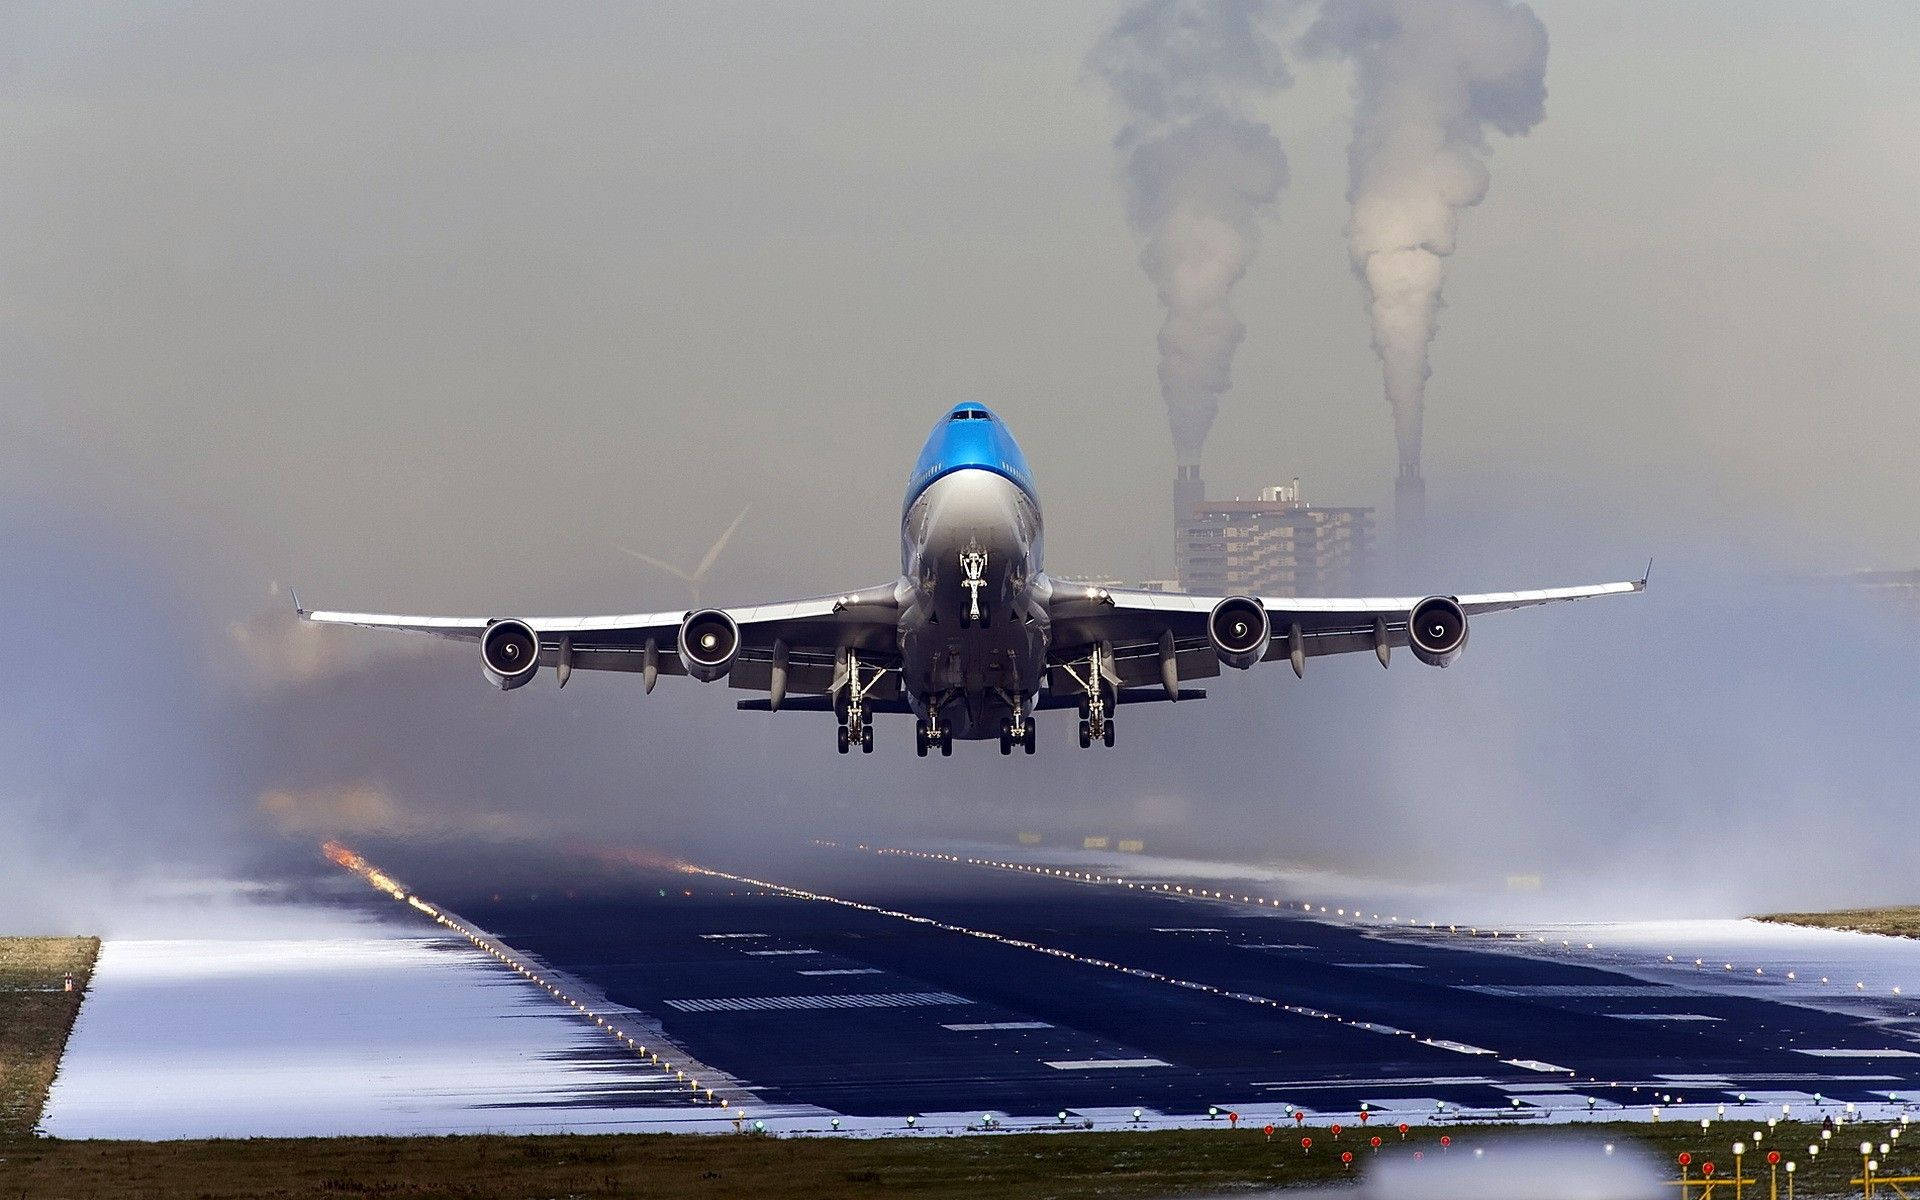 Snowy Airport Runway With KLM Aircraft Wallpaper